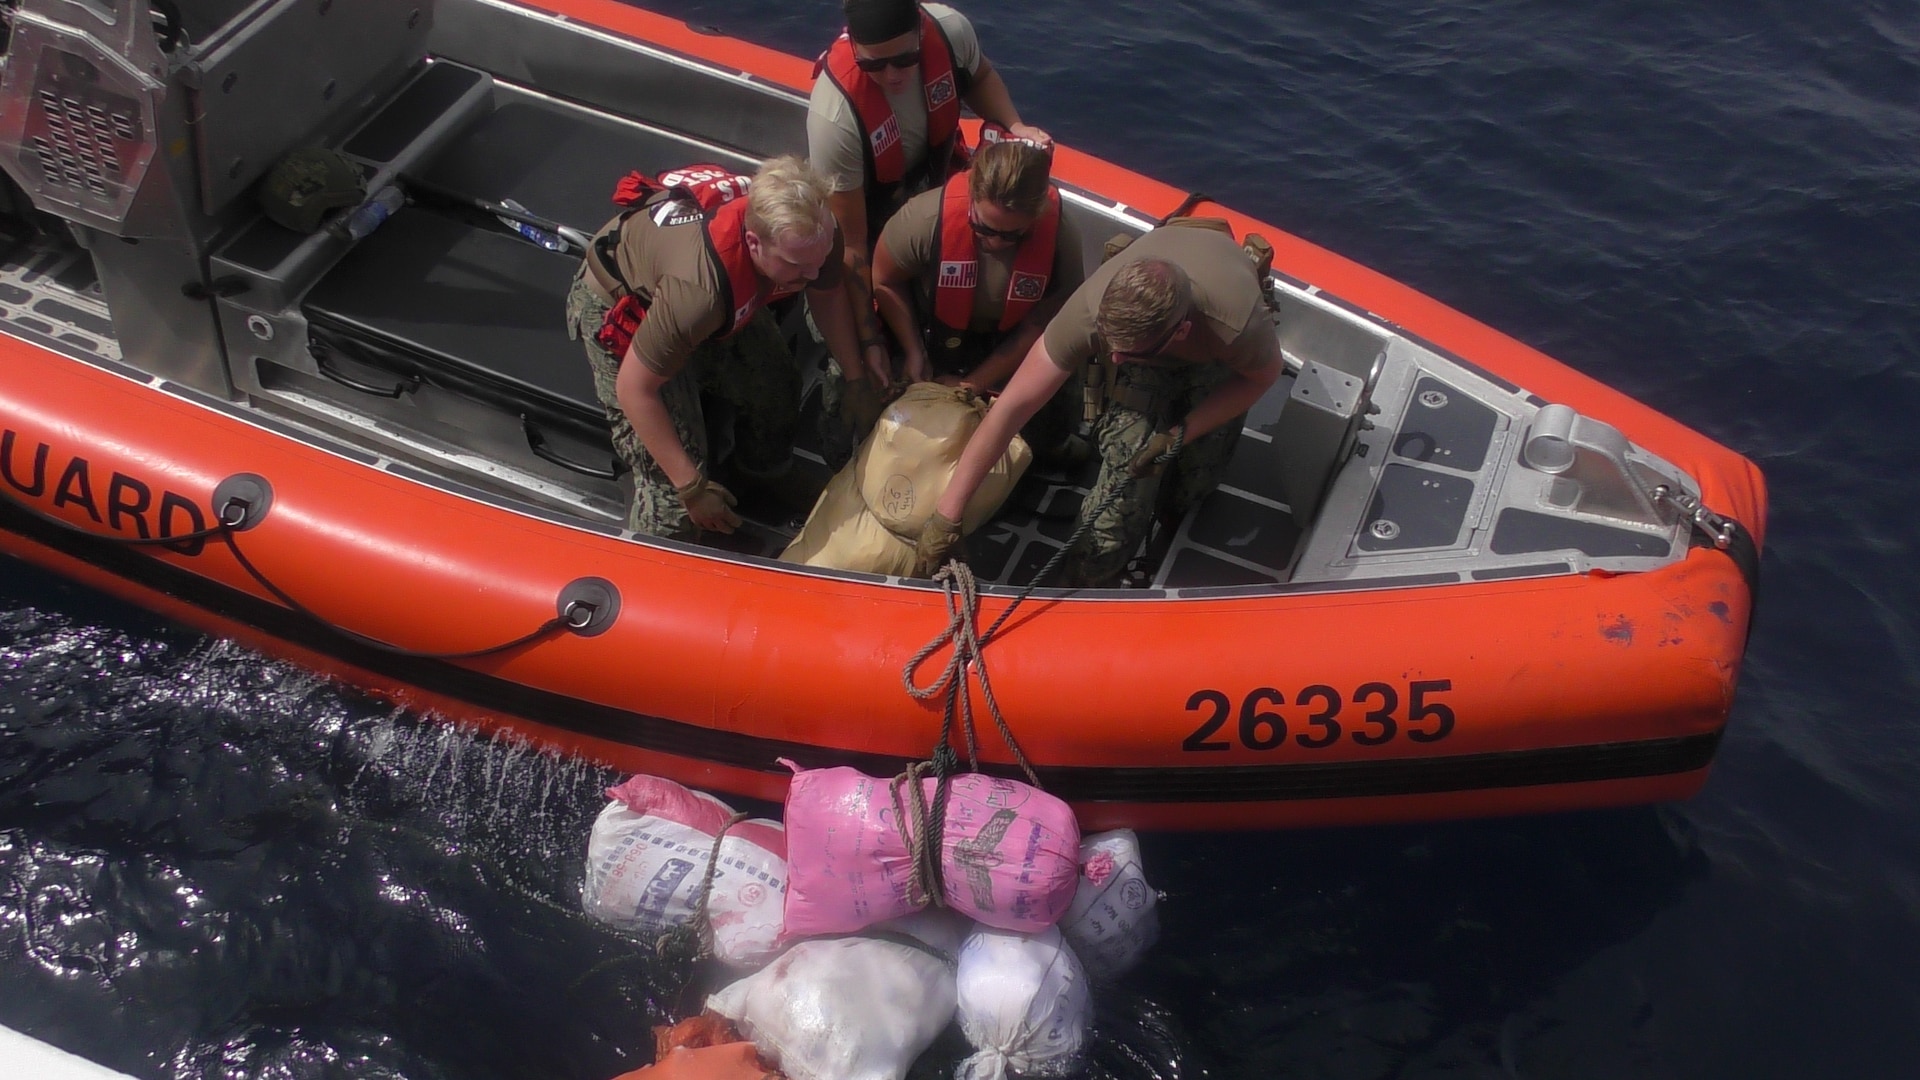 GULF OF OMAN (May 31, 2022) Personnel from U.S. Coast Guard fast response cutter USCGC Glen Harris (WPC 1144) recover bags of illegal narcotics discarded by a fishing vessel interdicted in the Gulf of Oman, May 31.